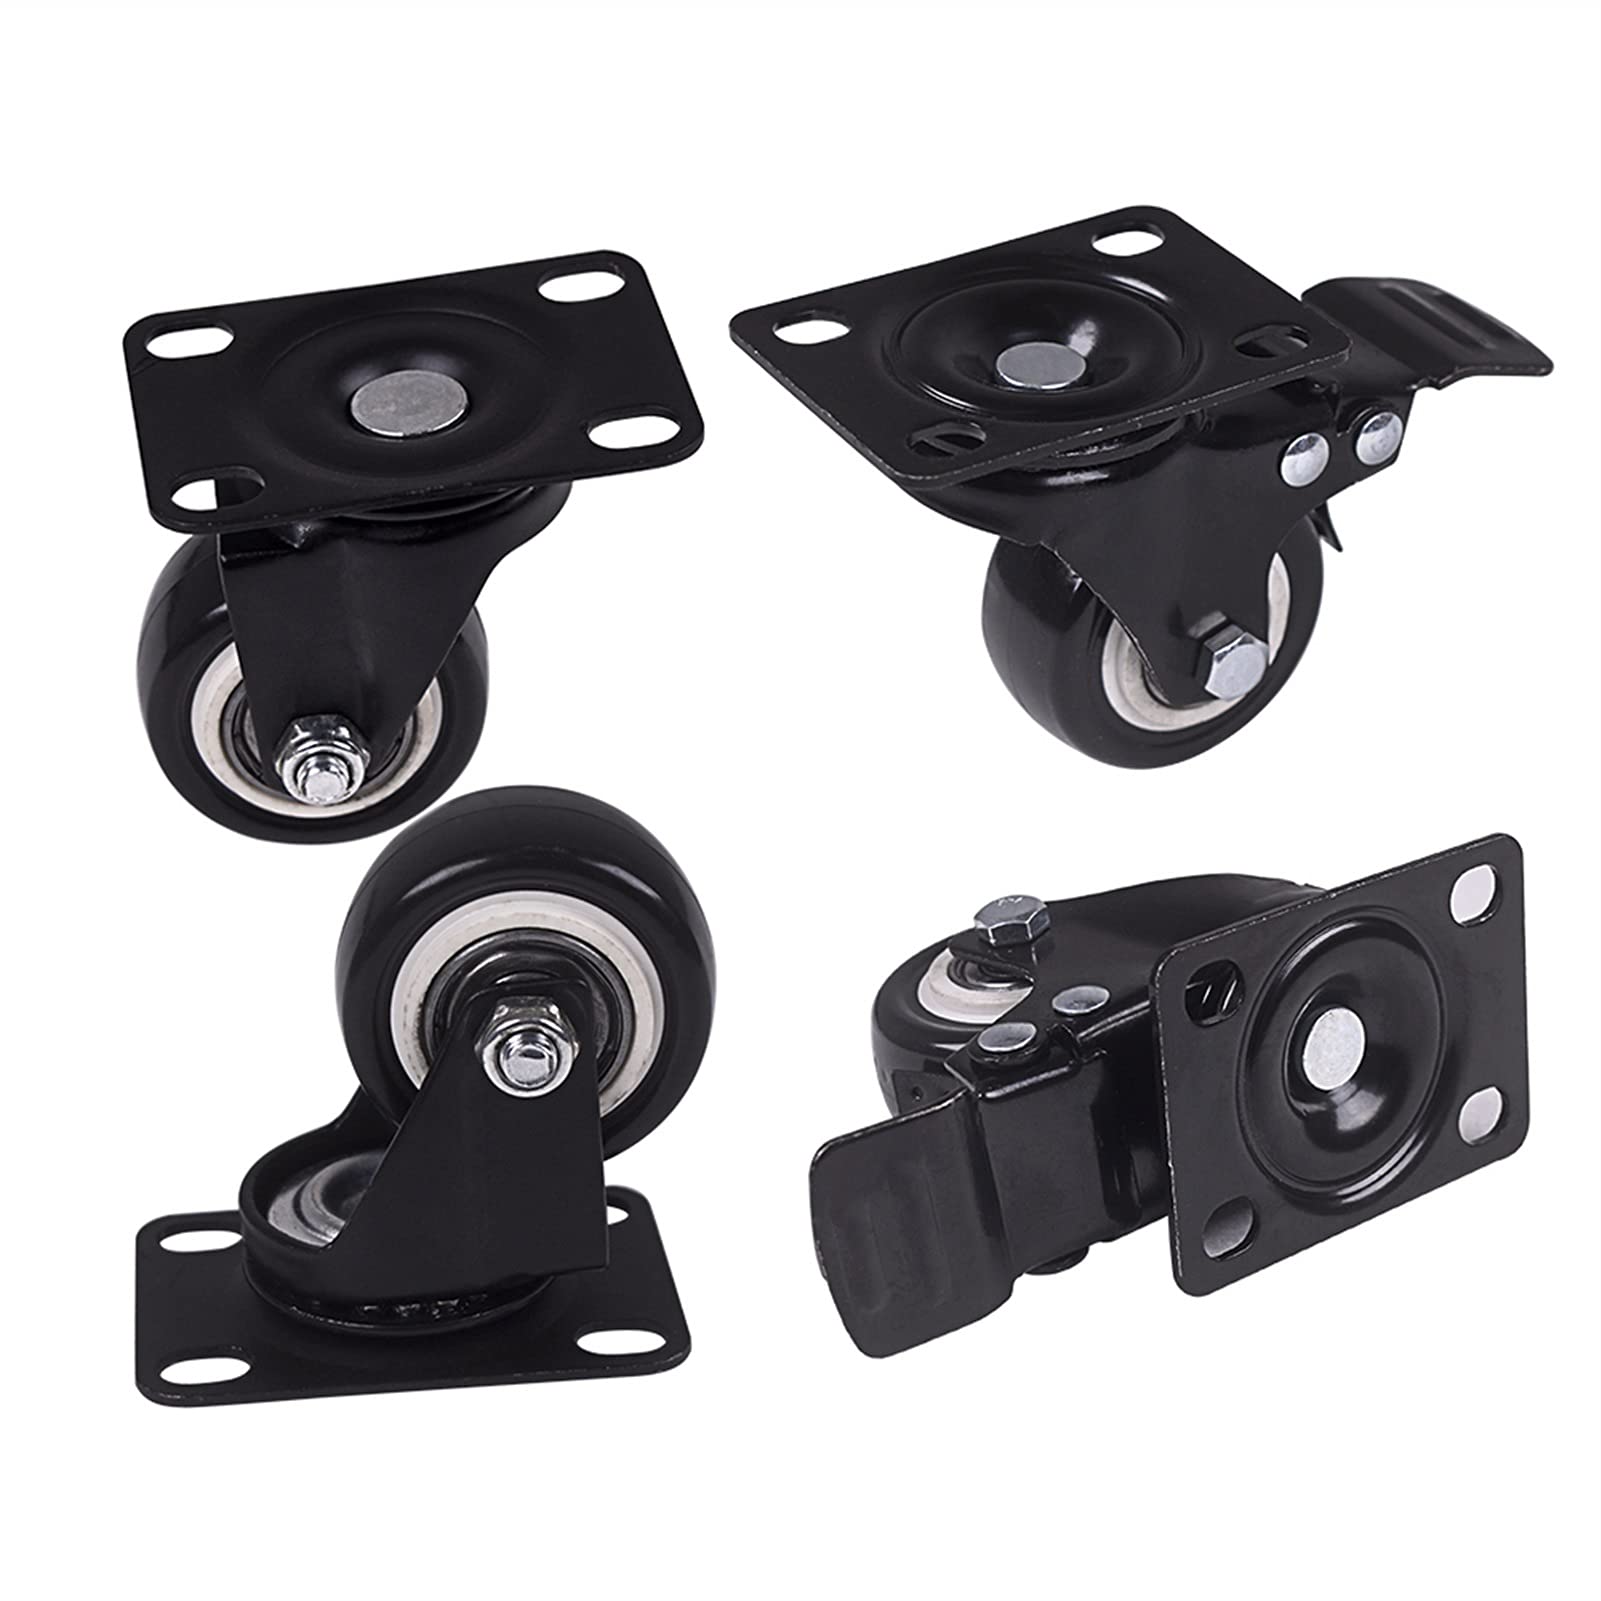 Caster Wheels Set Heavy Duty Swivel Caster Wheels with Safety Dual Locking and Polyurethane Foam No Noise Wheels, Load Bearing 440 Lbs Heavy Duty Casters